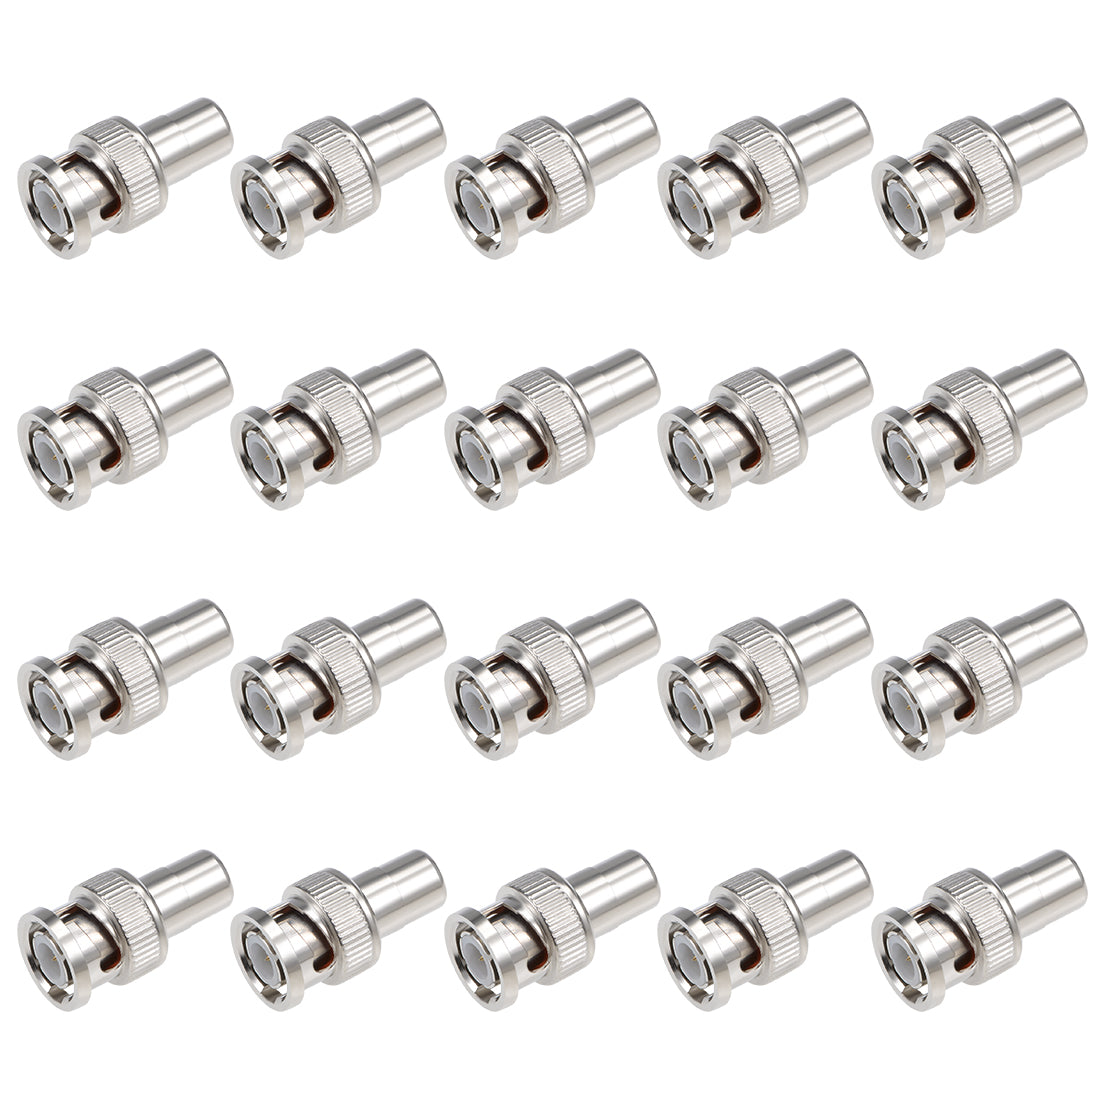 uxcell Uxcell 20pcs Alloy BNC Male to RCA Female Adapter Straight Connector for CCTV Security Camera